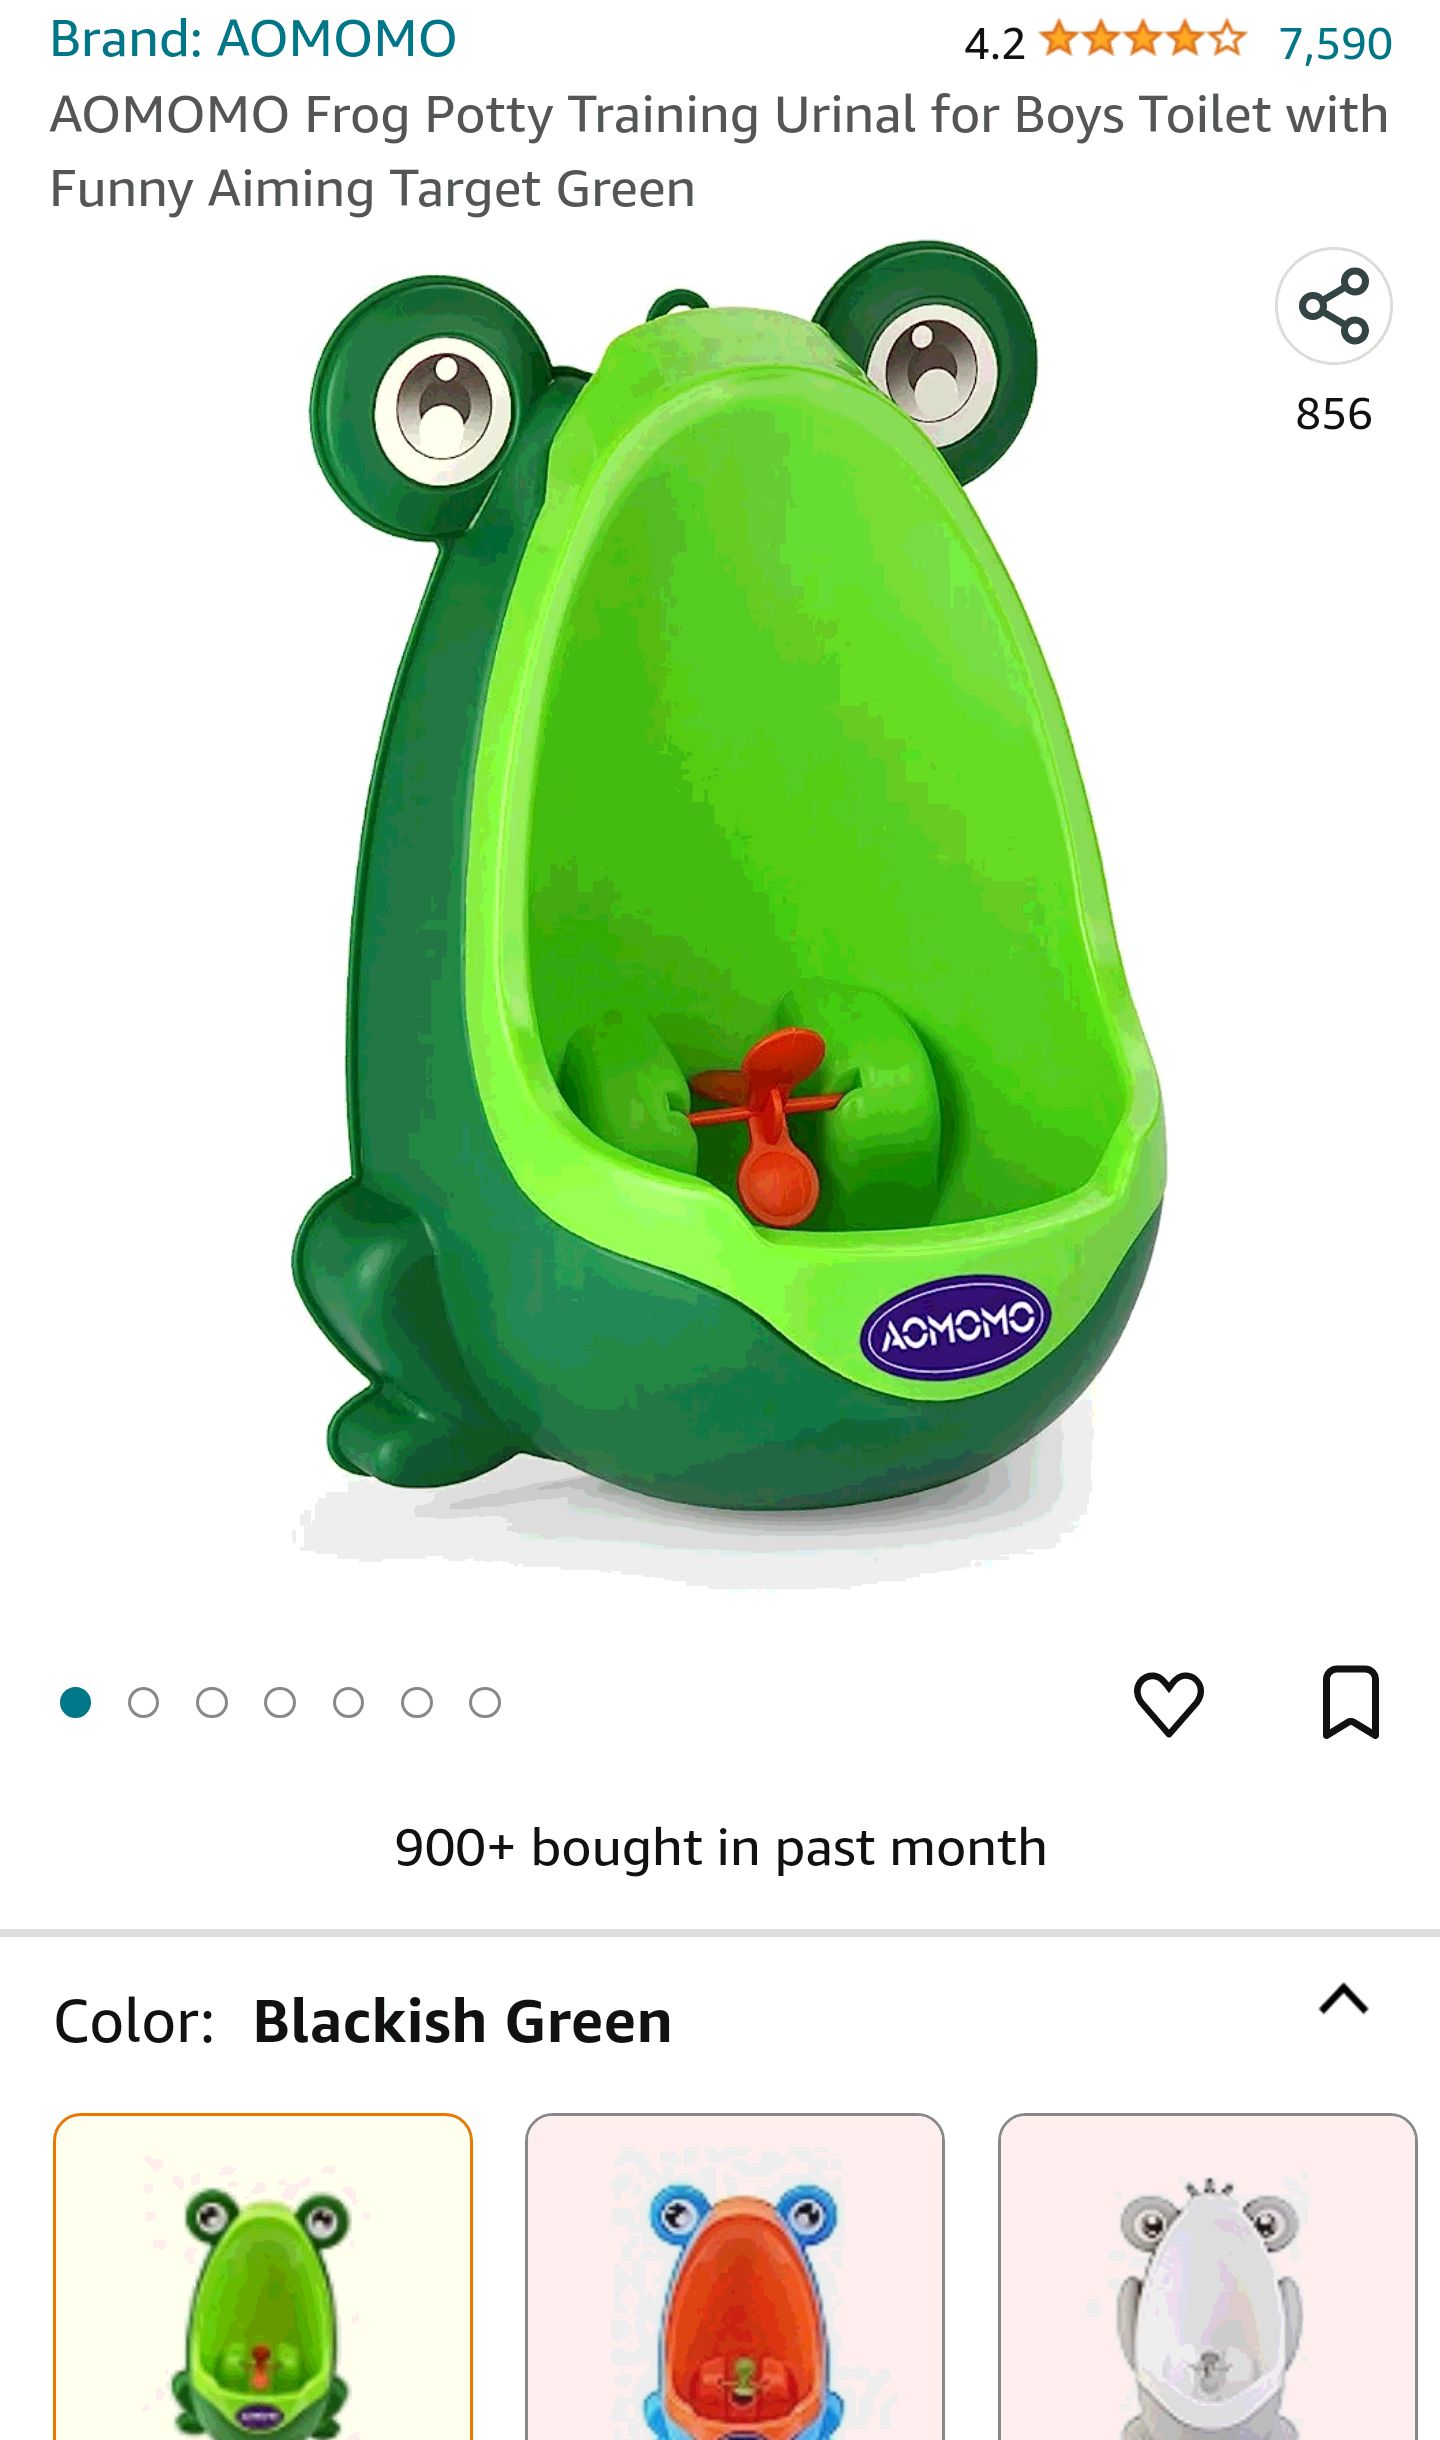 AOMOMO Frog Potty Training Urinal for Boys Toilet with Funny Aiming Target Green : Baby